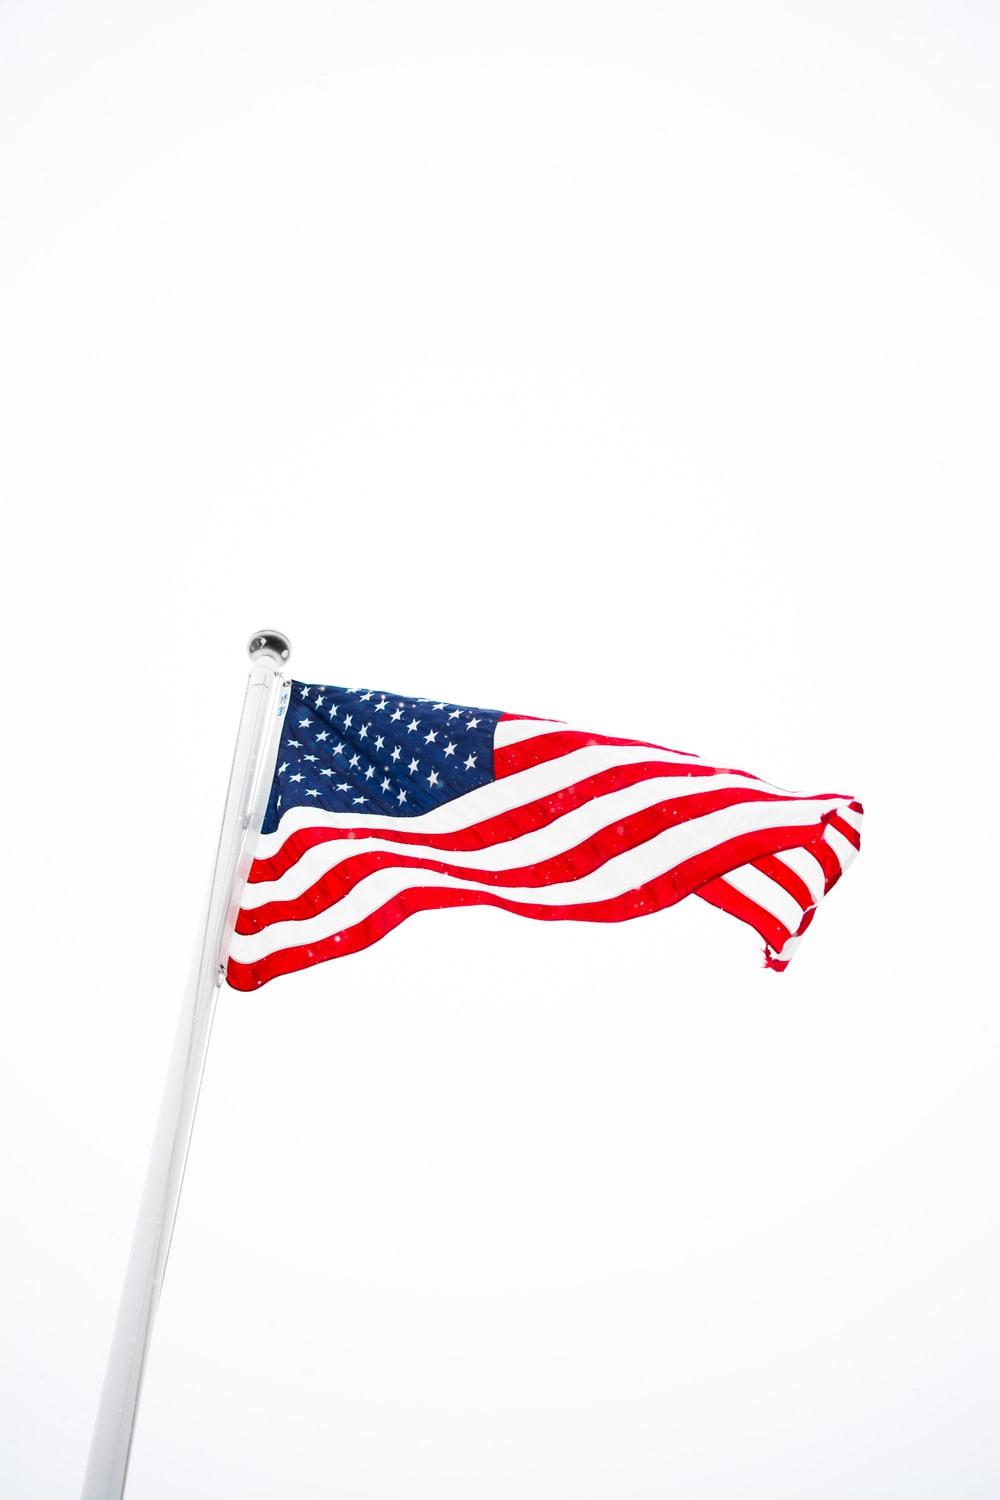 American Flag Image: Download HD Picture & Photo